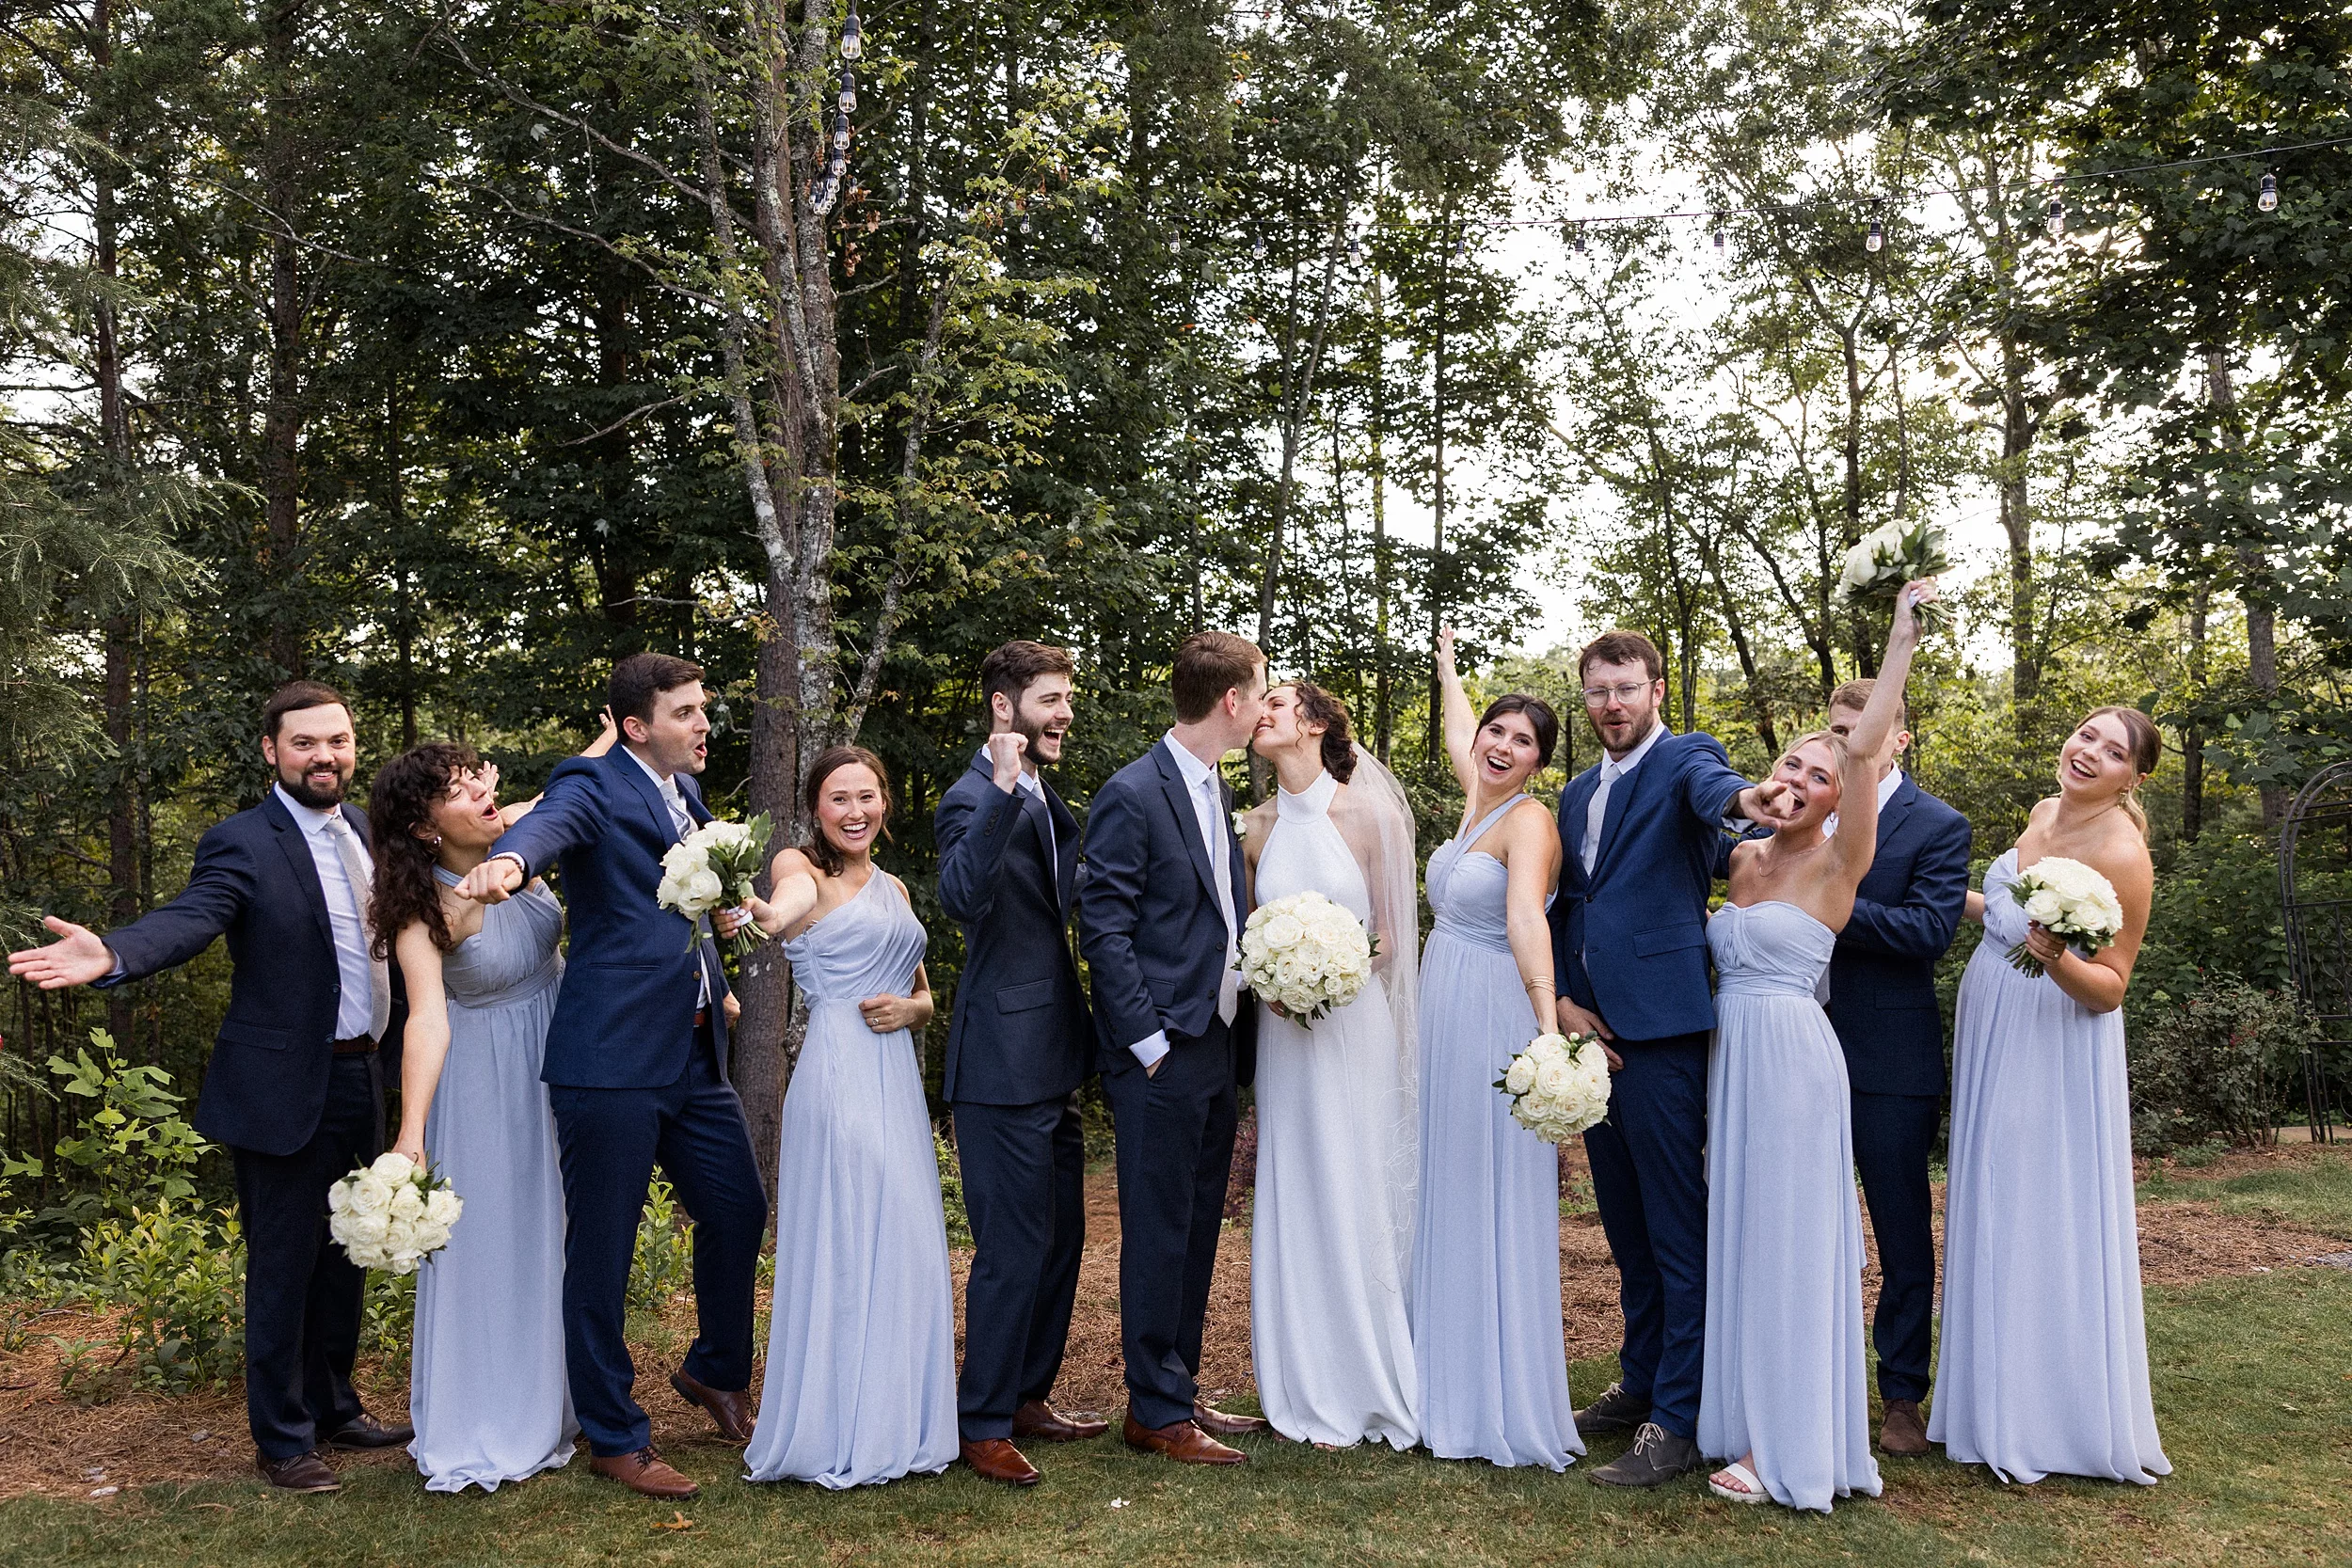 Newlyweds kiss while their wedding party celebrates around them outside in the woods